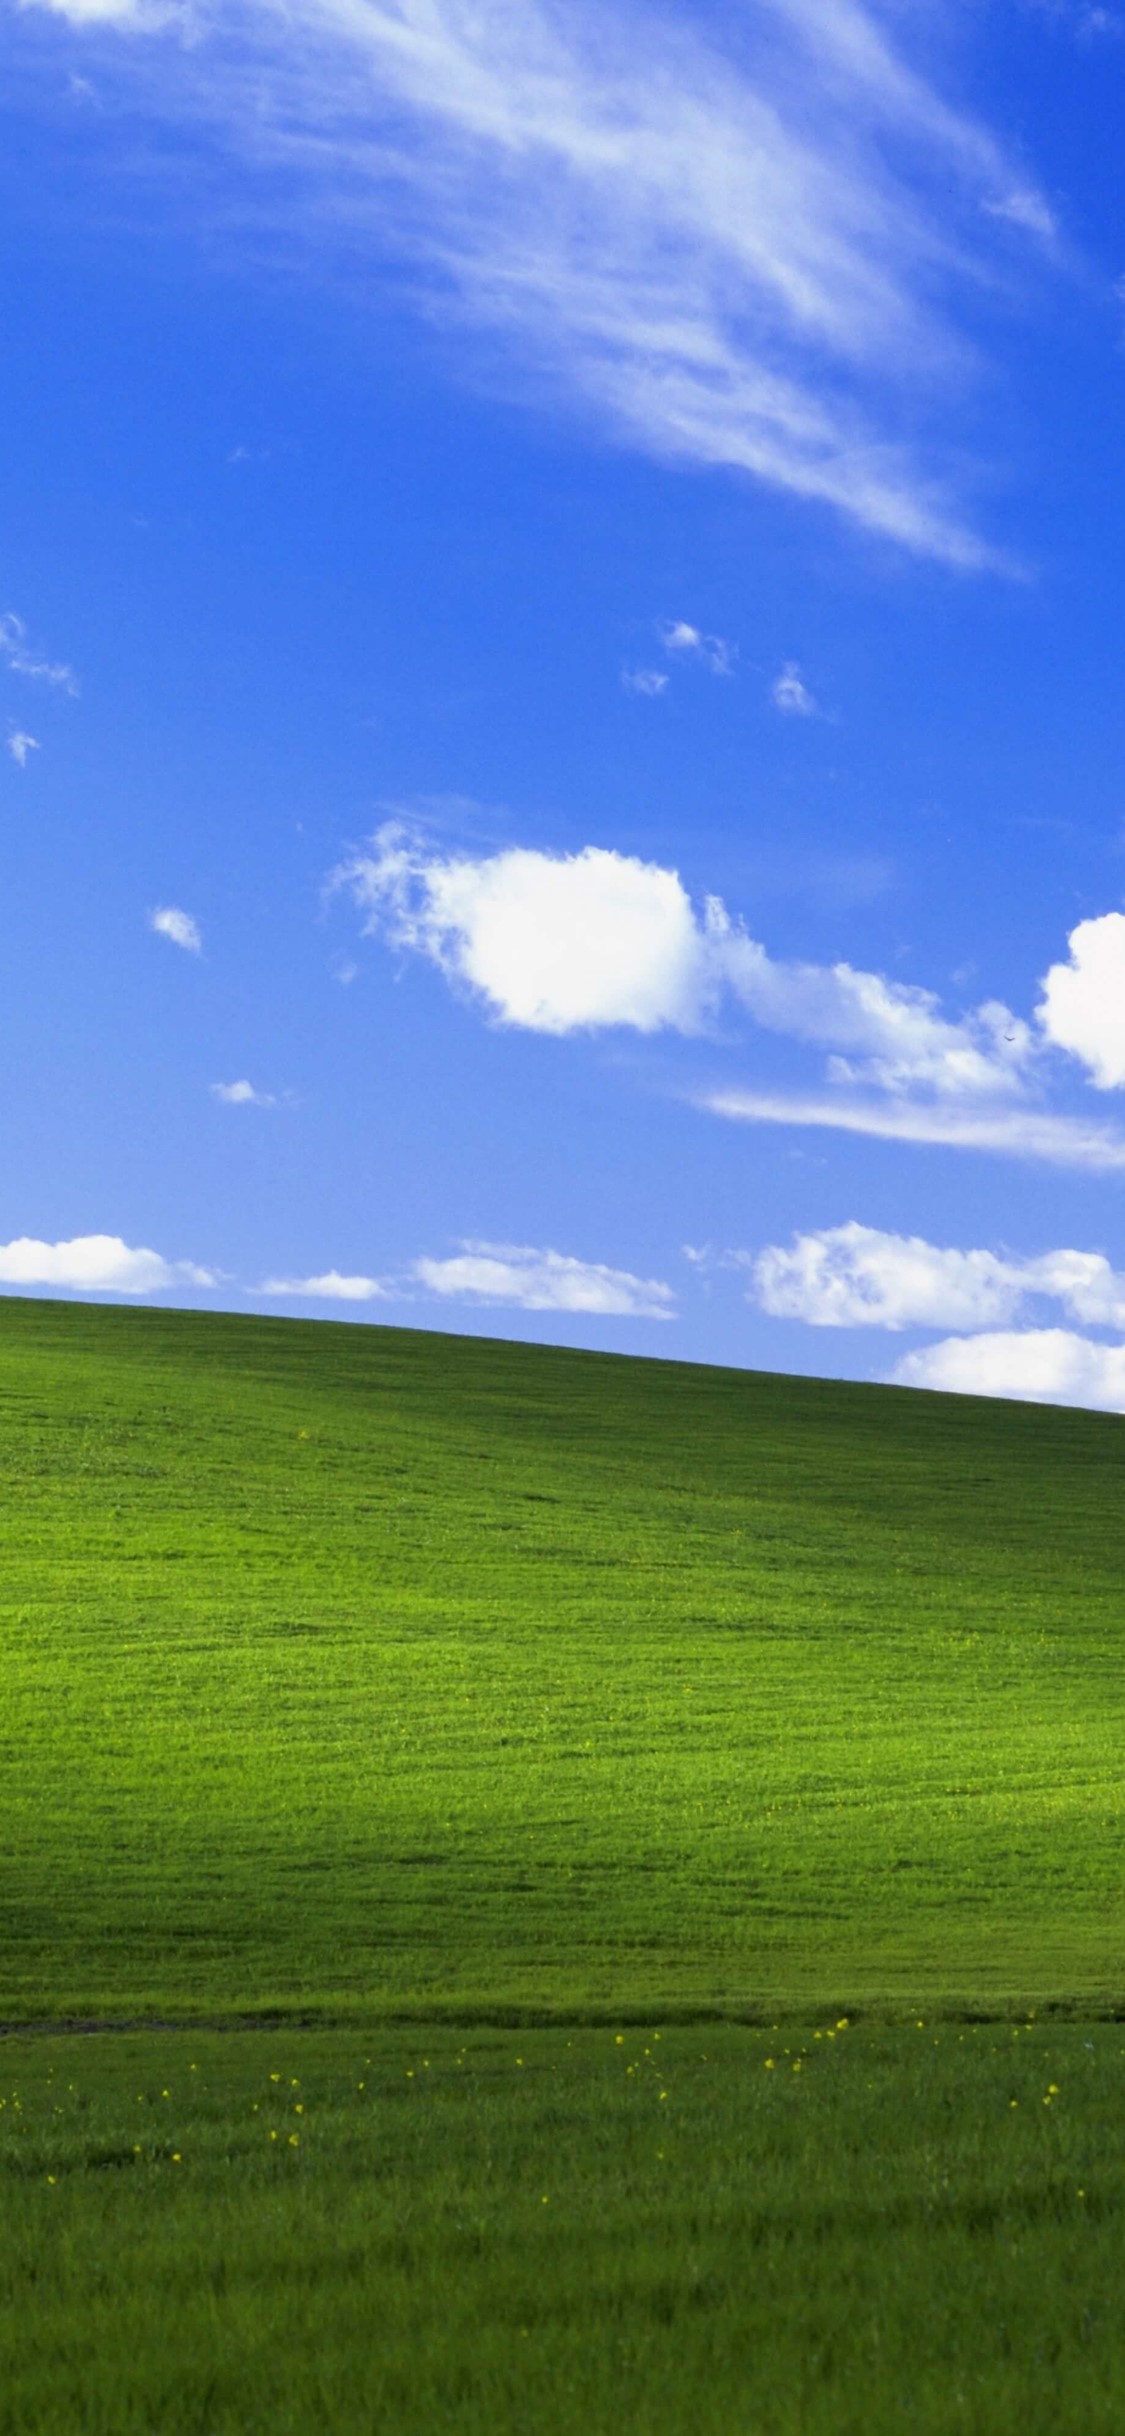 Windows Xp Professional Wallpapers